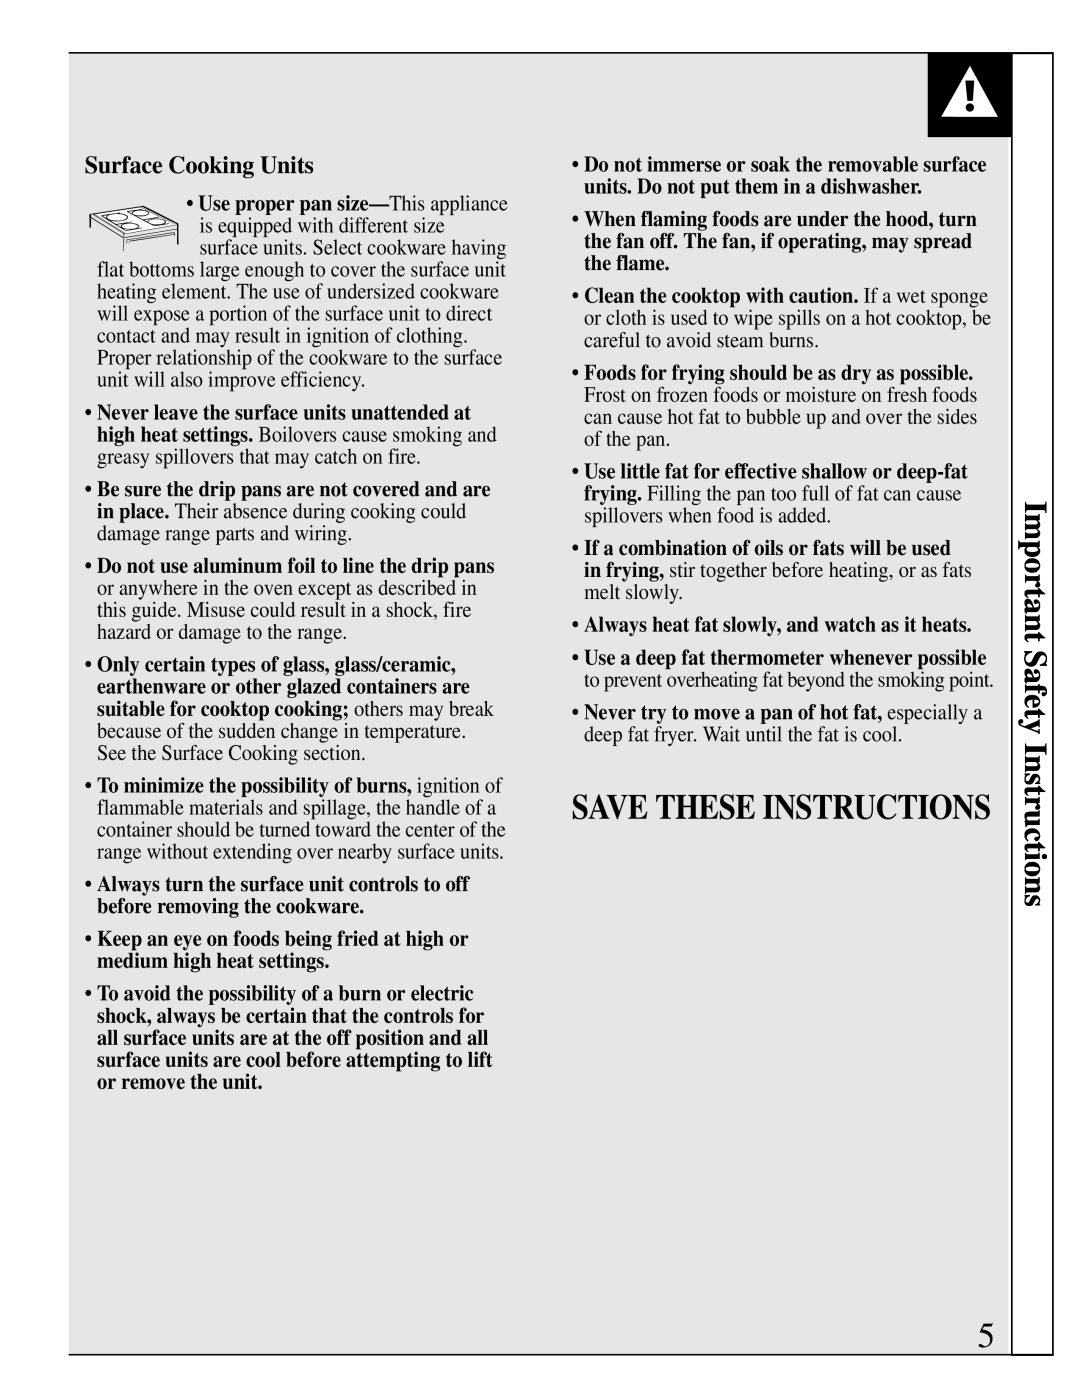 GE JMS10 warranty Save These Instructions, Surface Cooking Units, Important Safety Instructions 